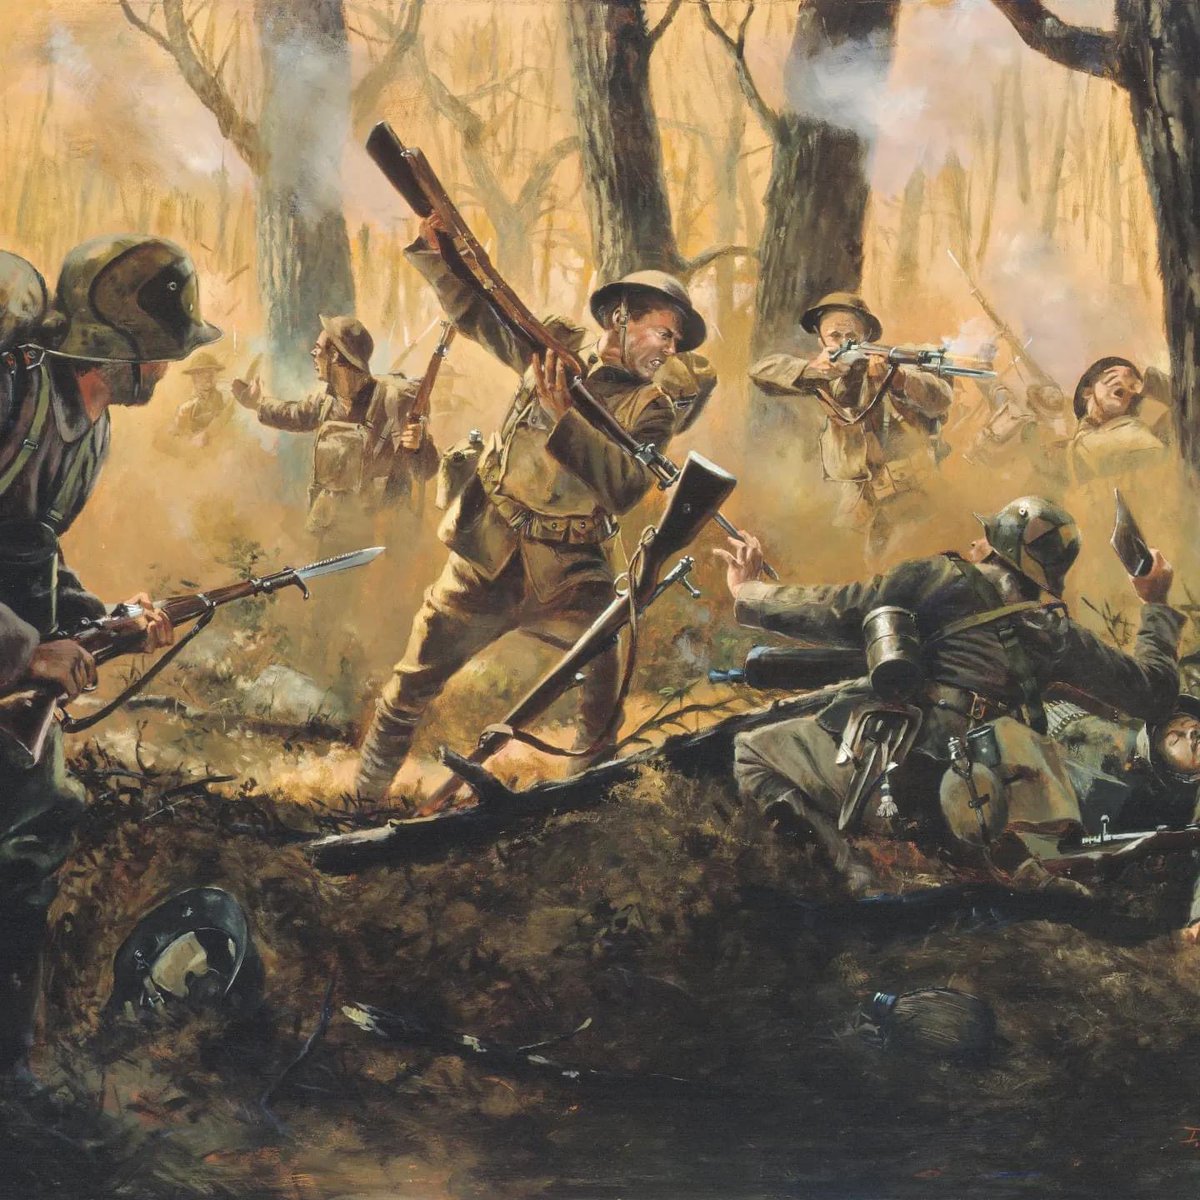 Men of Iron Painting by Don Troiani depicting the Second Battle of the Marne, July 15, 1918.